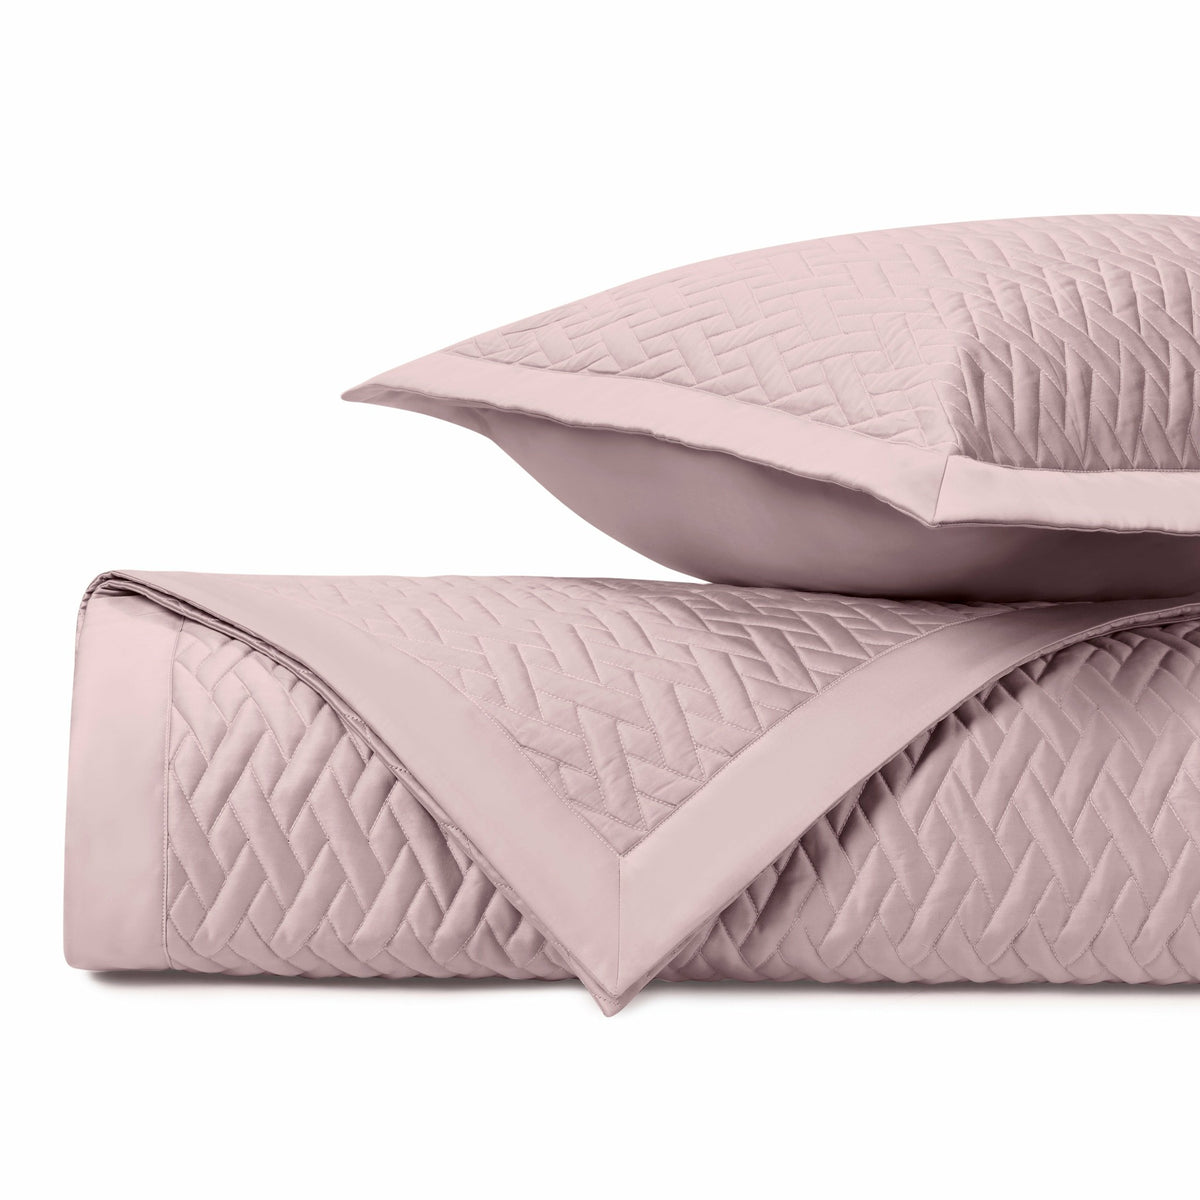 Home Treasures Viscaya Quilted Bedding Incenso Lavender Fine Linens